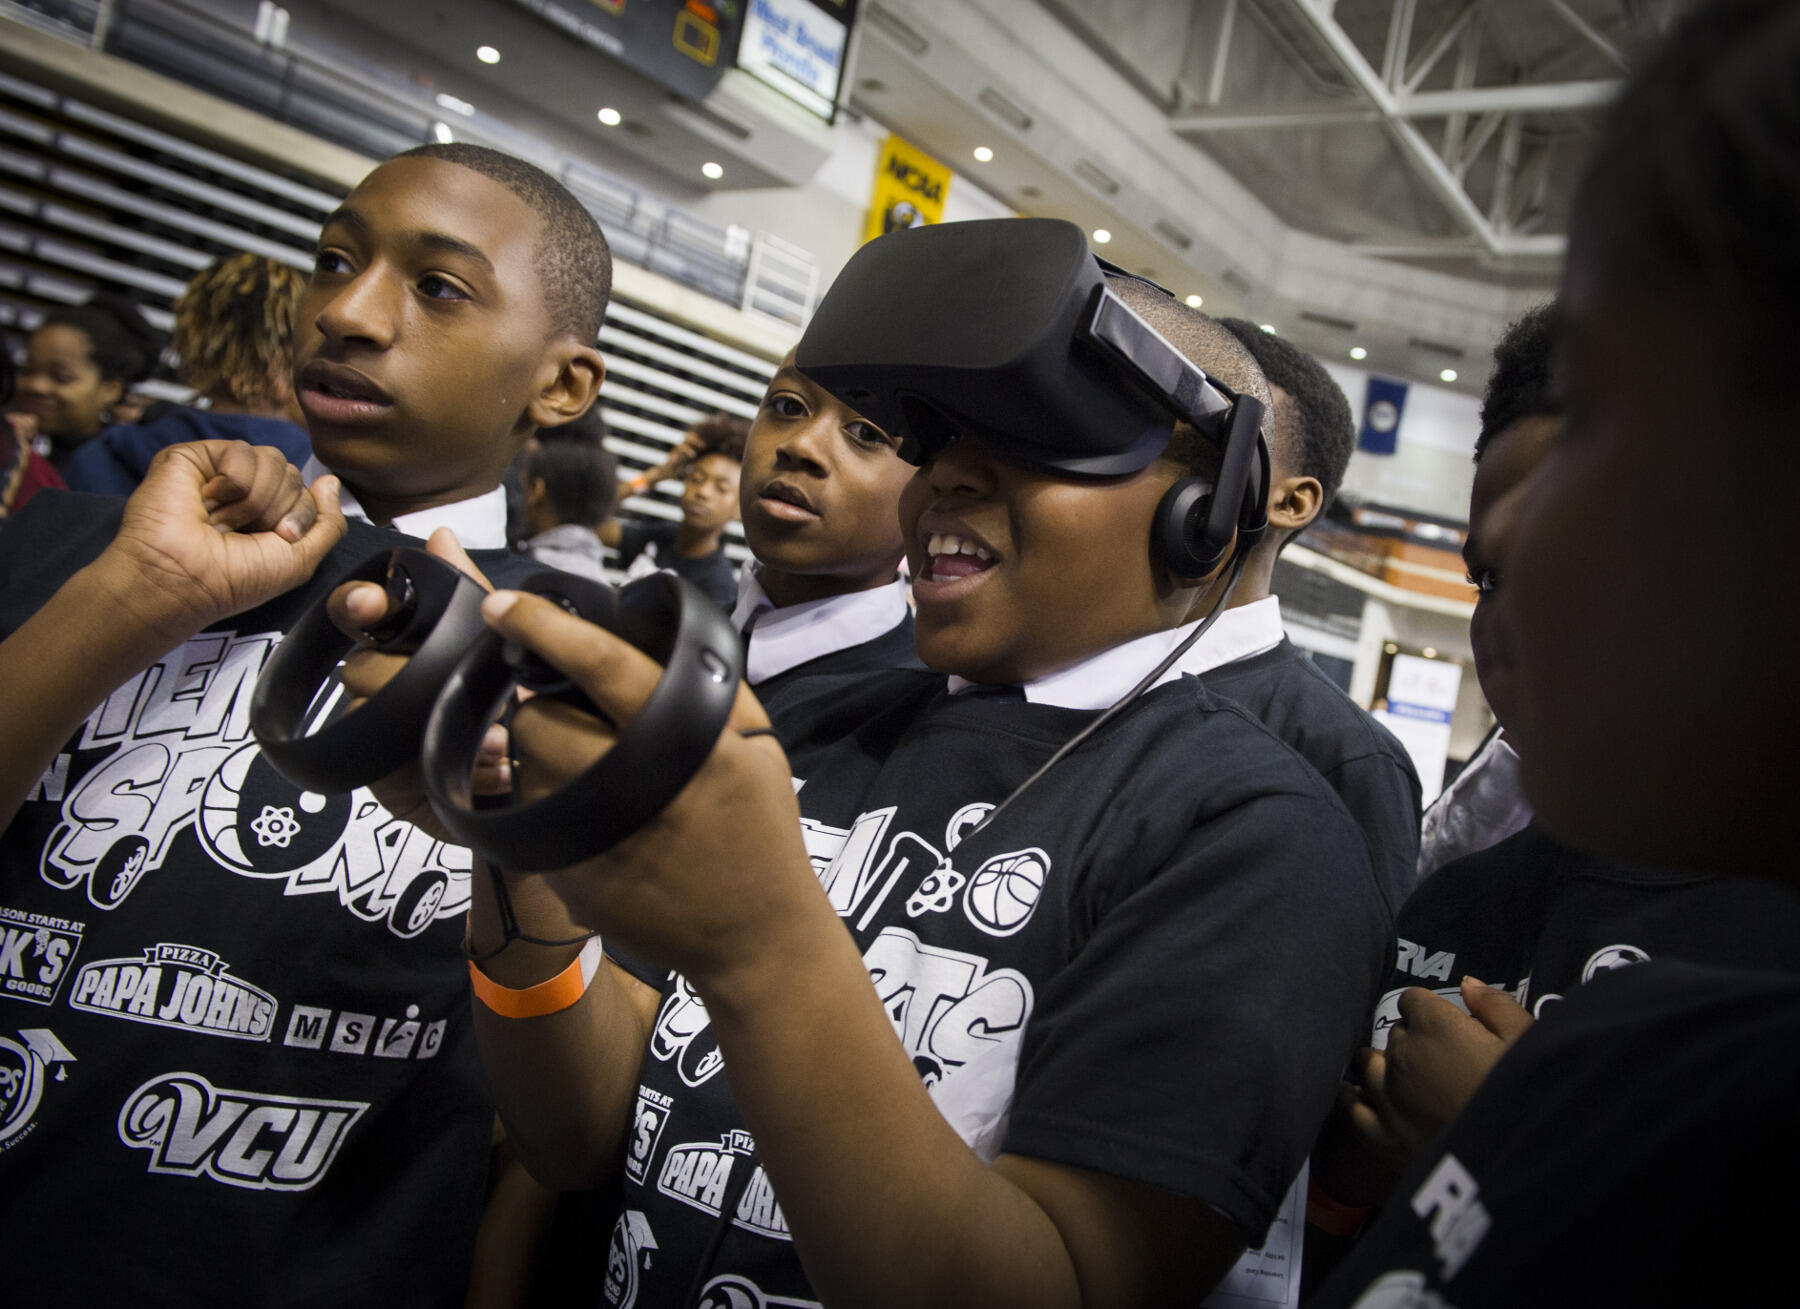 At one station, Barton Malow Co. gave the Richmond Public Schools students a chance to check out virtual reality goggles, such as the Oculus Rift, along with augmented reality headsets, such as the Microsoft HoloLens.
